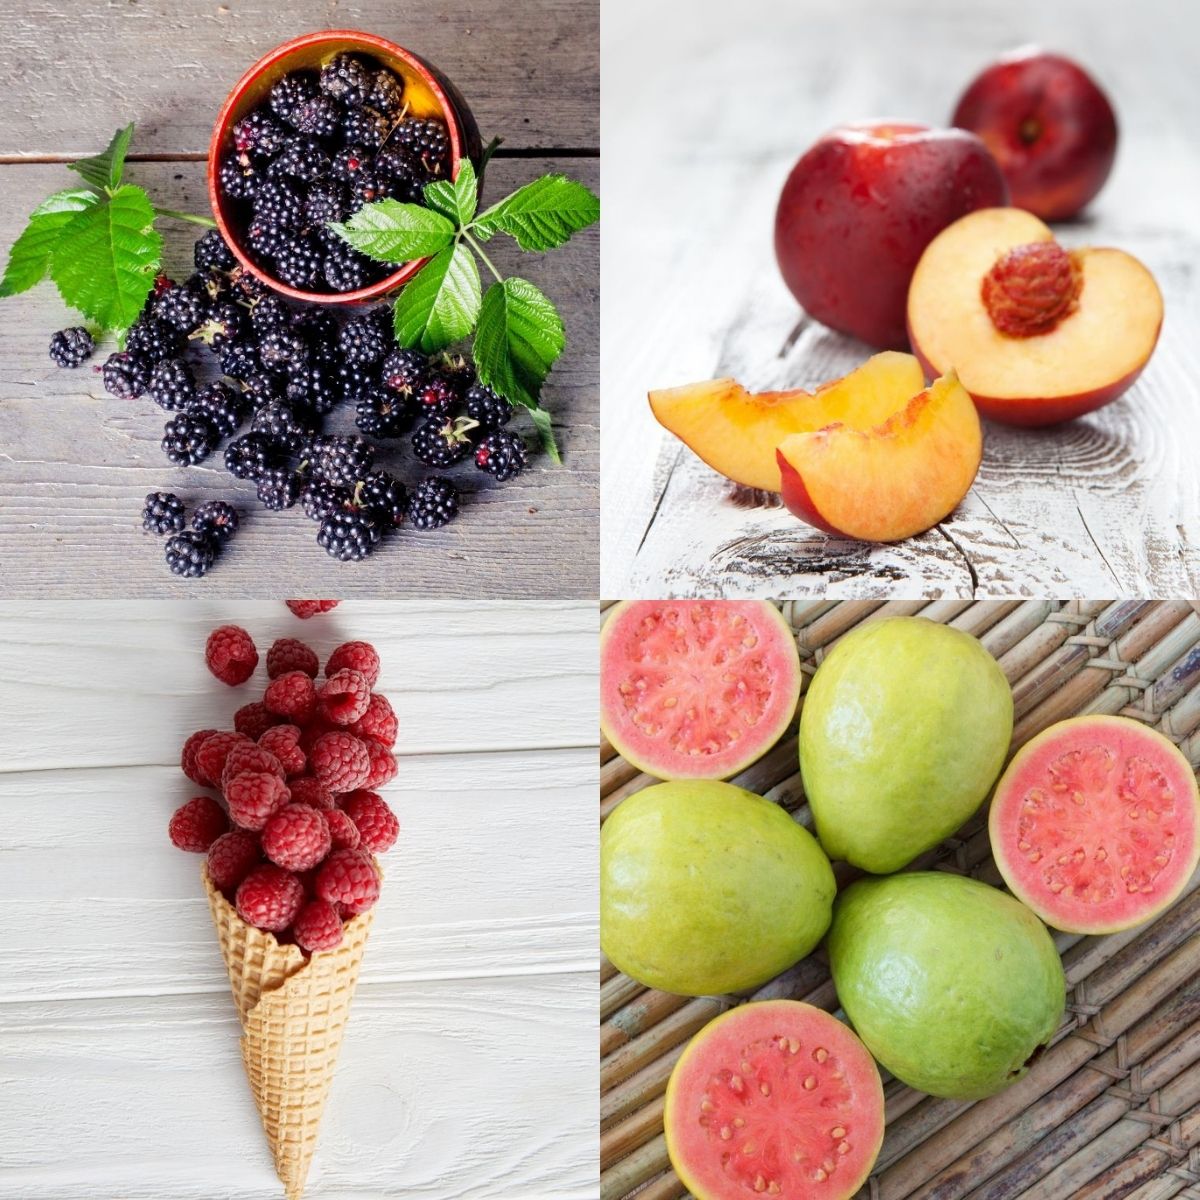 15 High Protein Fruits to Include in Your Diet